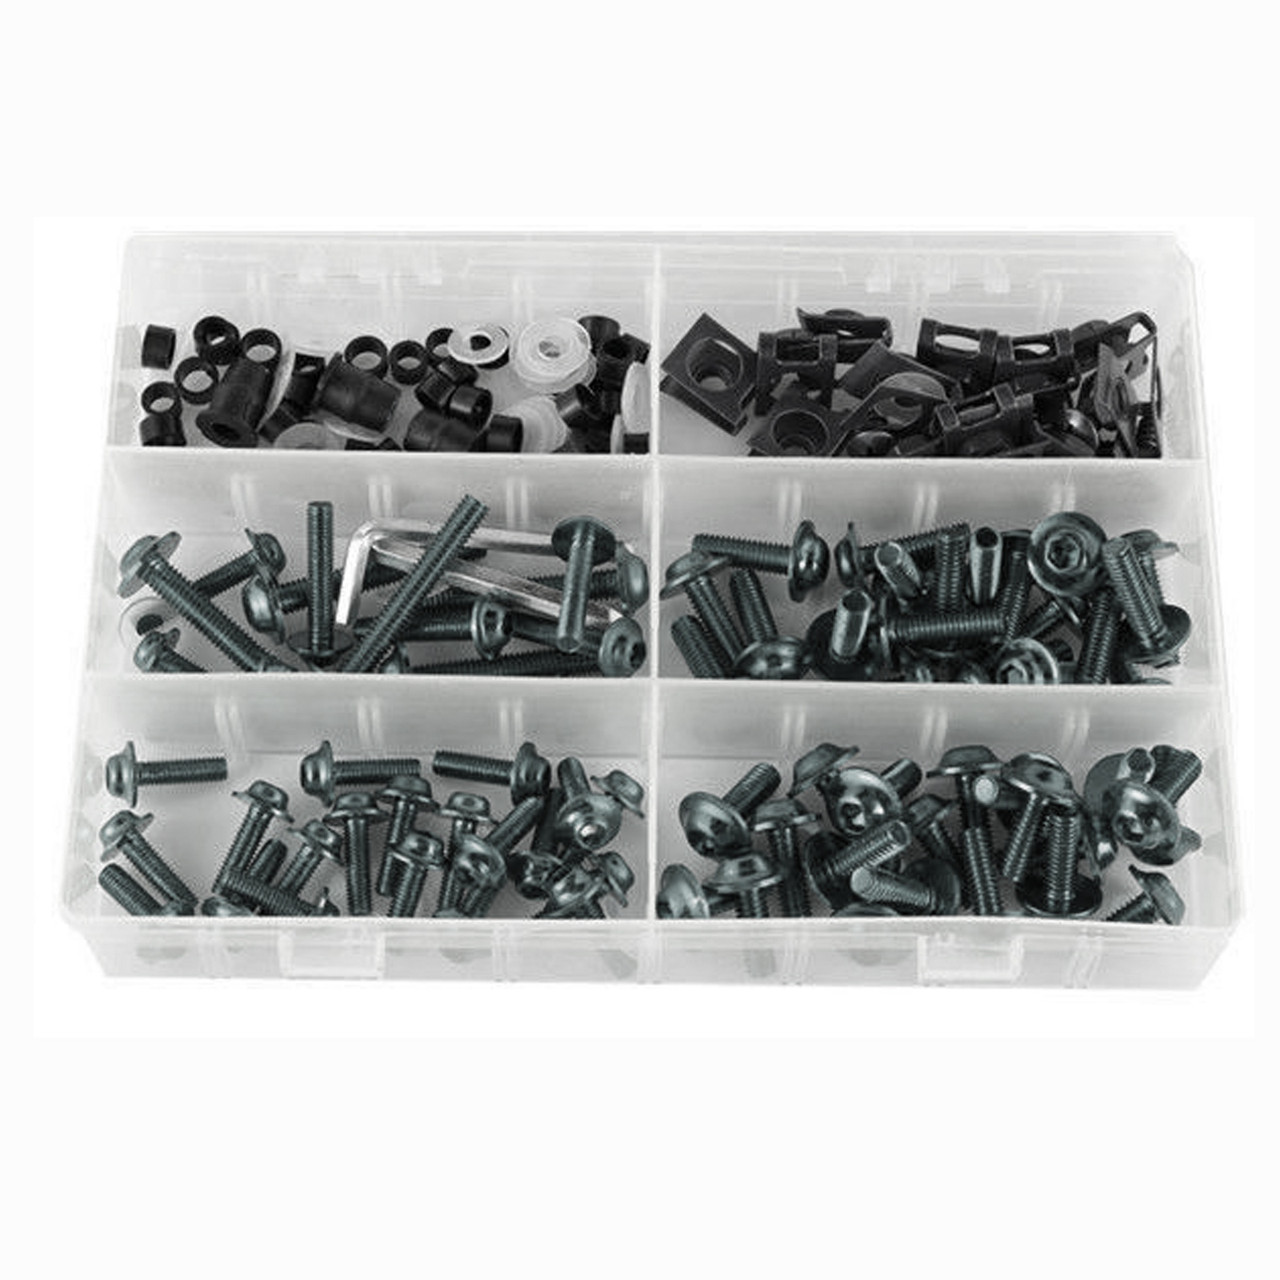 177PCS Motorcycle Sportbike Windscreen Fairing Bolts Kit Fastener Clips Screws Universal Fit For Yamaha Motorcycle/Motorbikes/Sportbikes/Scooter/Streetbikes TIT~BC2